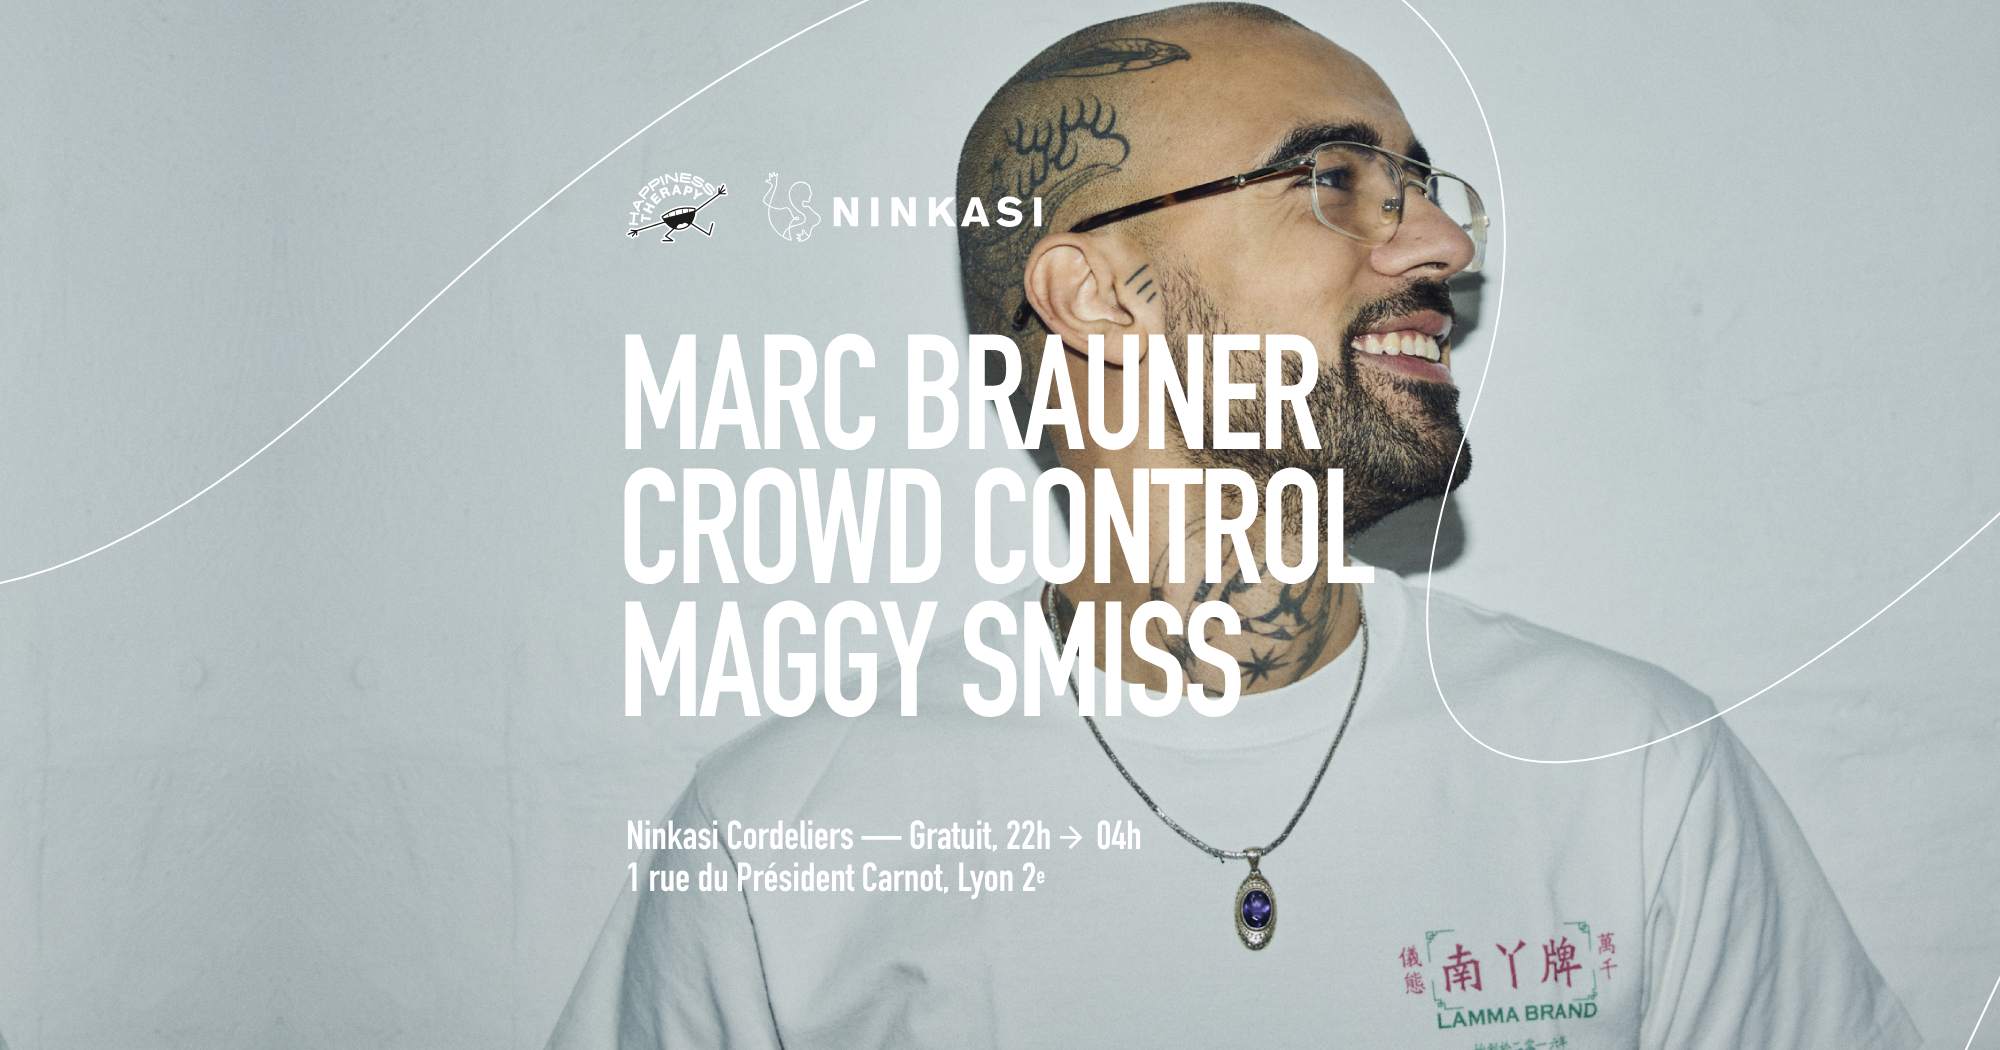 Happiness Therapy: Marc Brauner, Crowd Control, Maggy Smiss - Página frontal